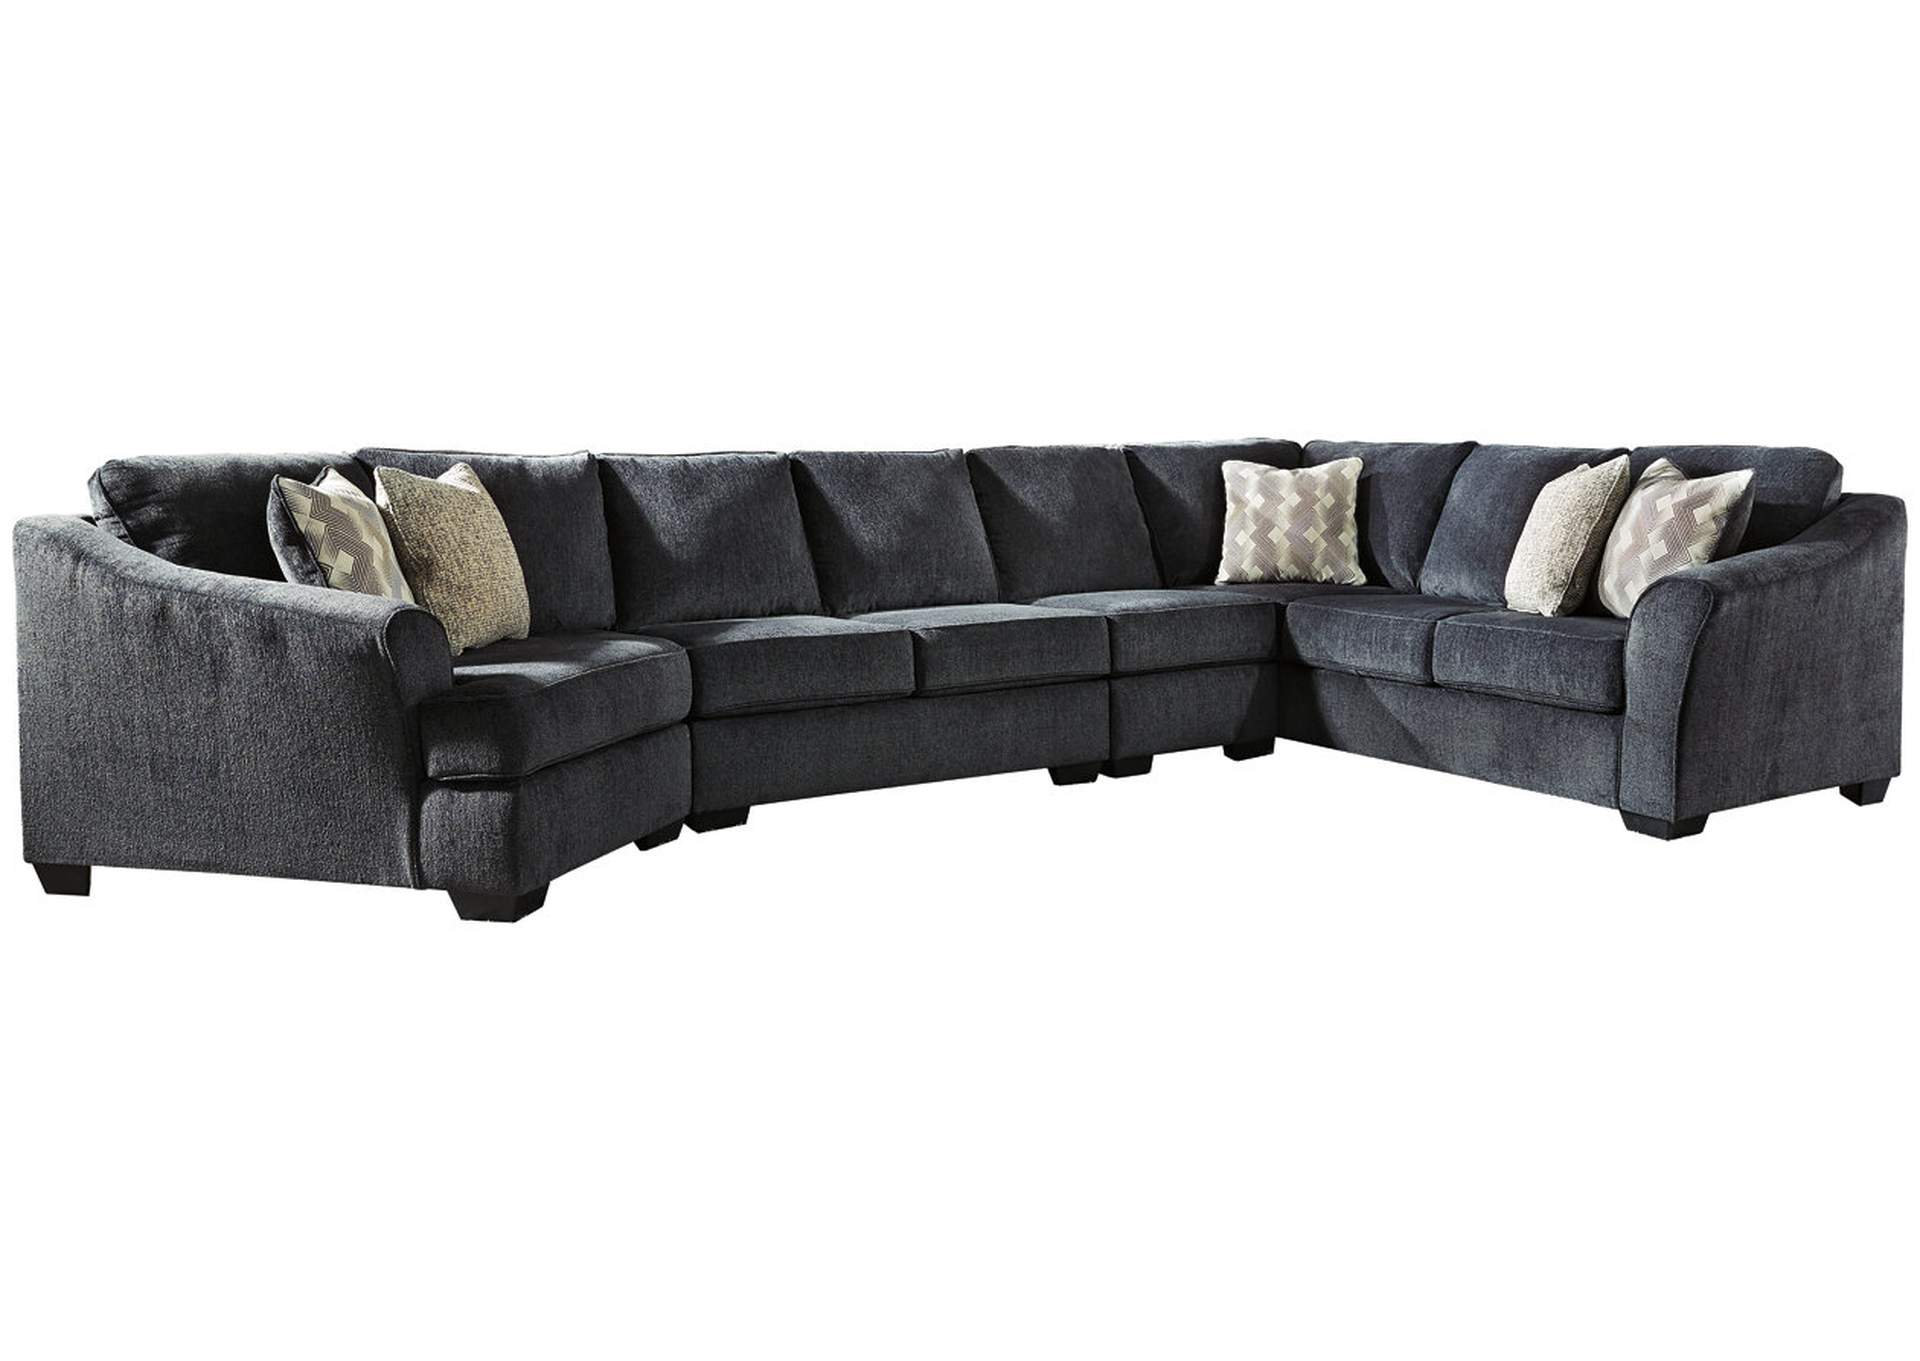 Eltmann 4-Piece Sectional with Cuddler,Signature Design By Ashley